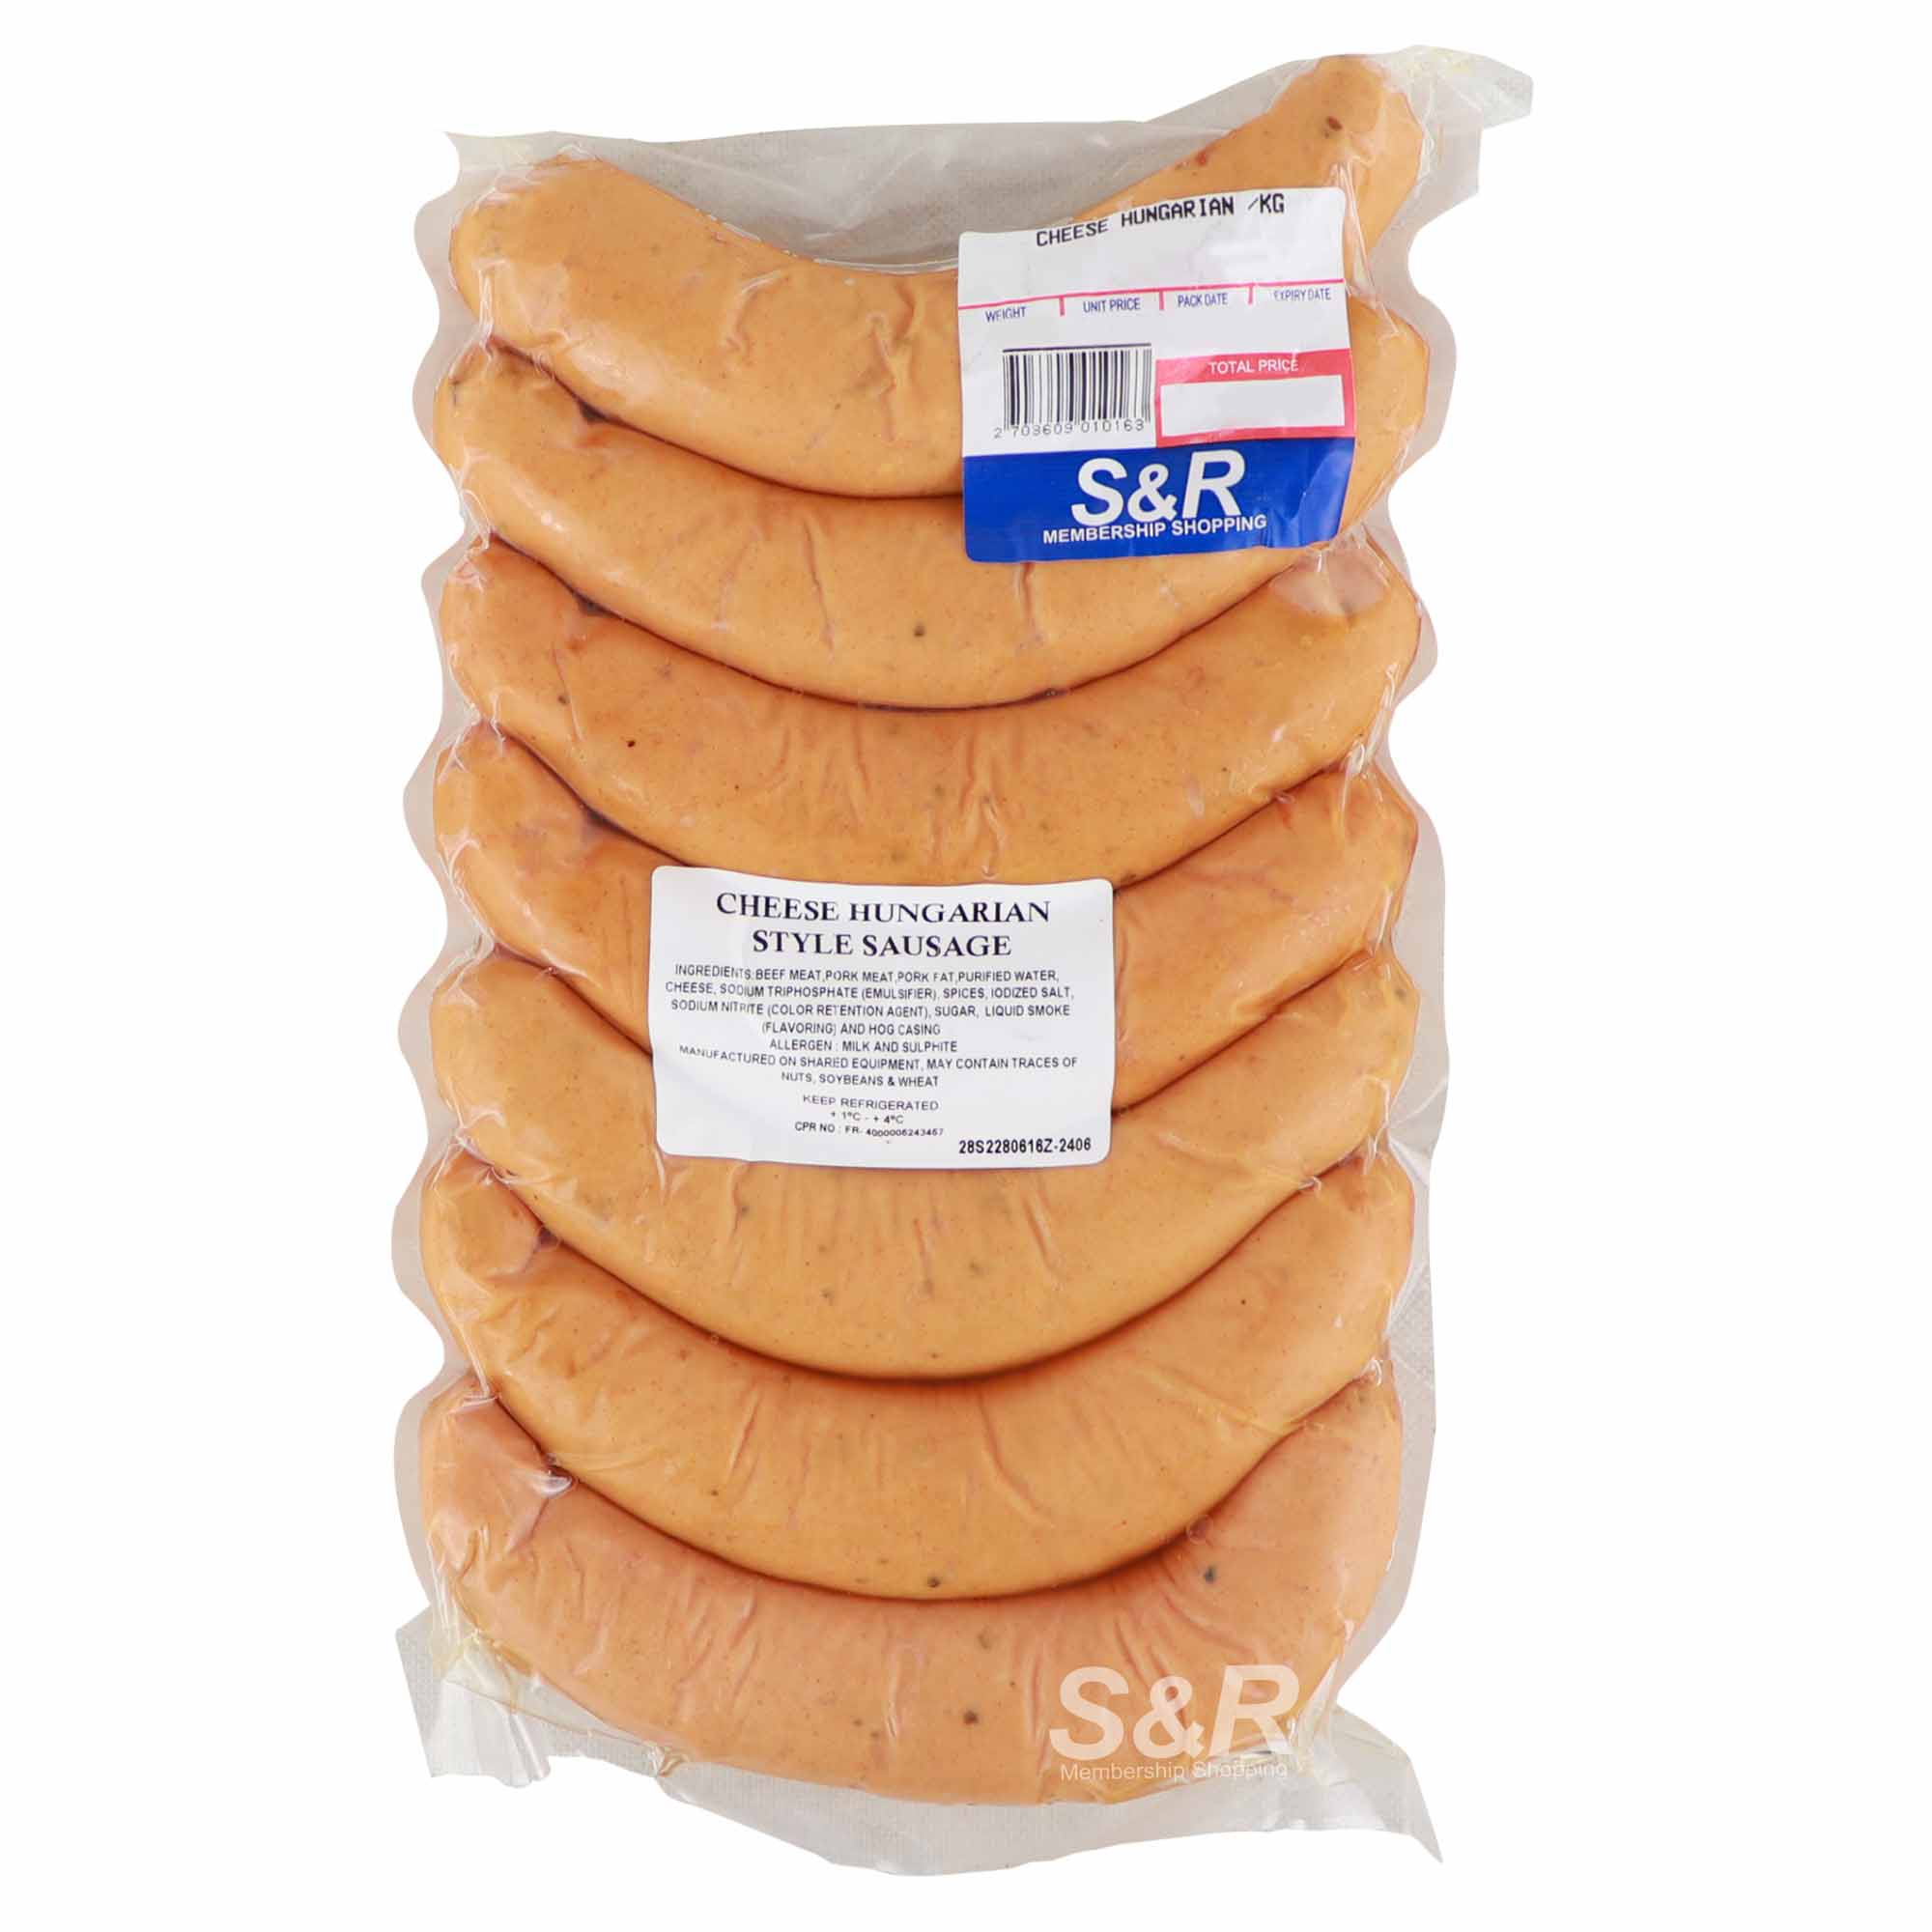 Member's Value Cheese Hungarian Style Sausage approx. 1.2kg